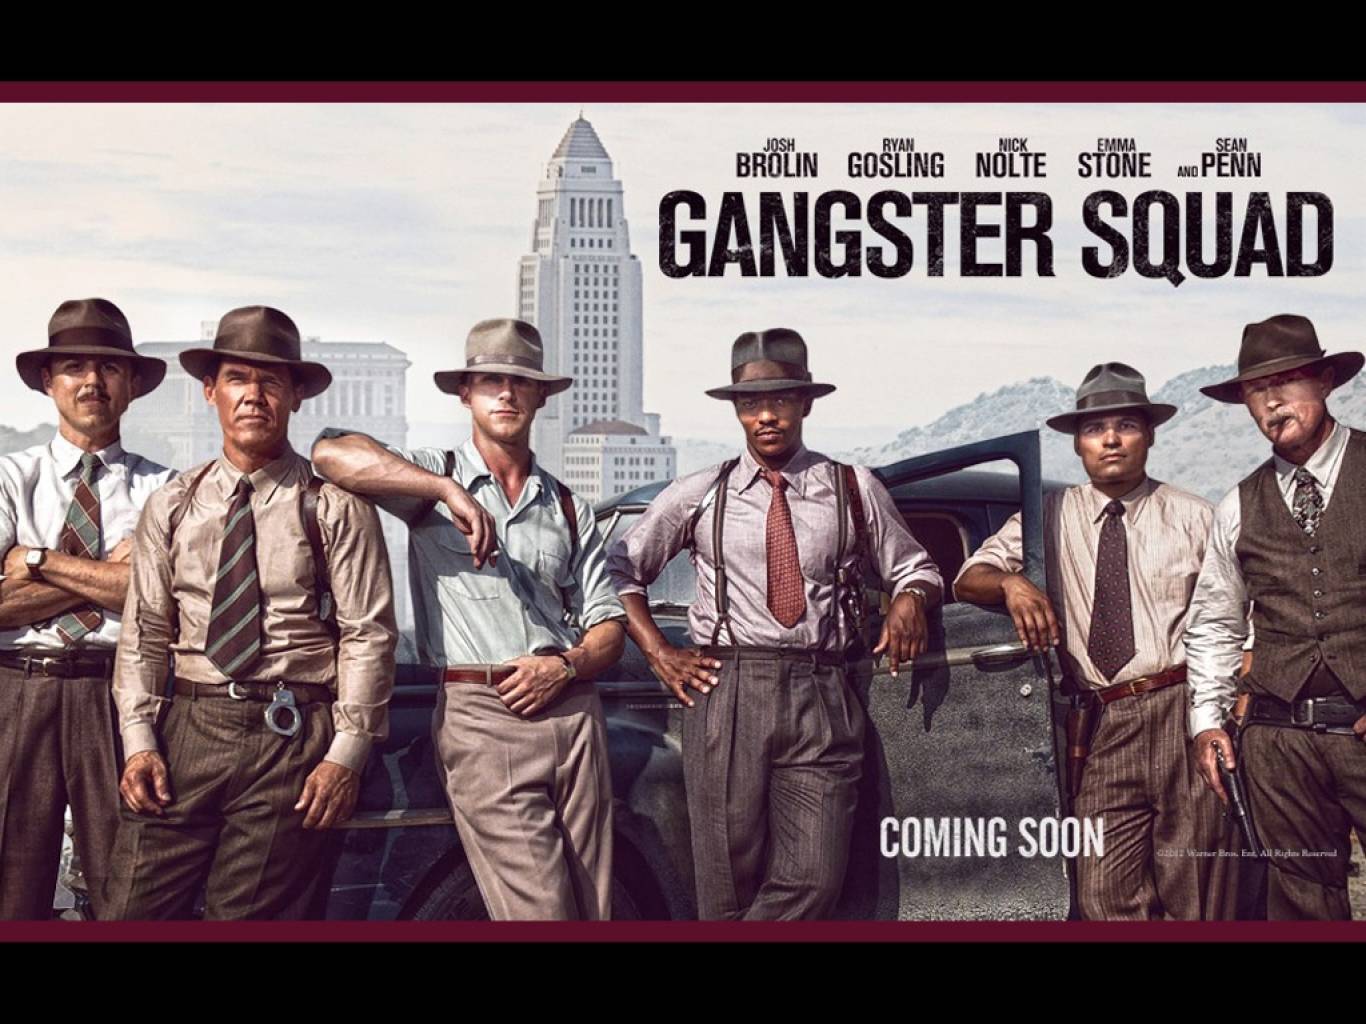 Gangster Squad Movie HD Wallpaper. Gangster Squad HD Movie Wallpaper Free Download (1080p to 2K)